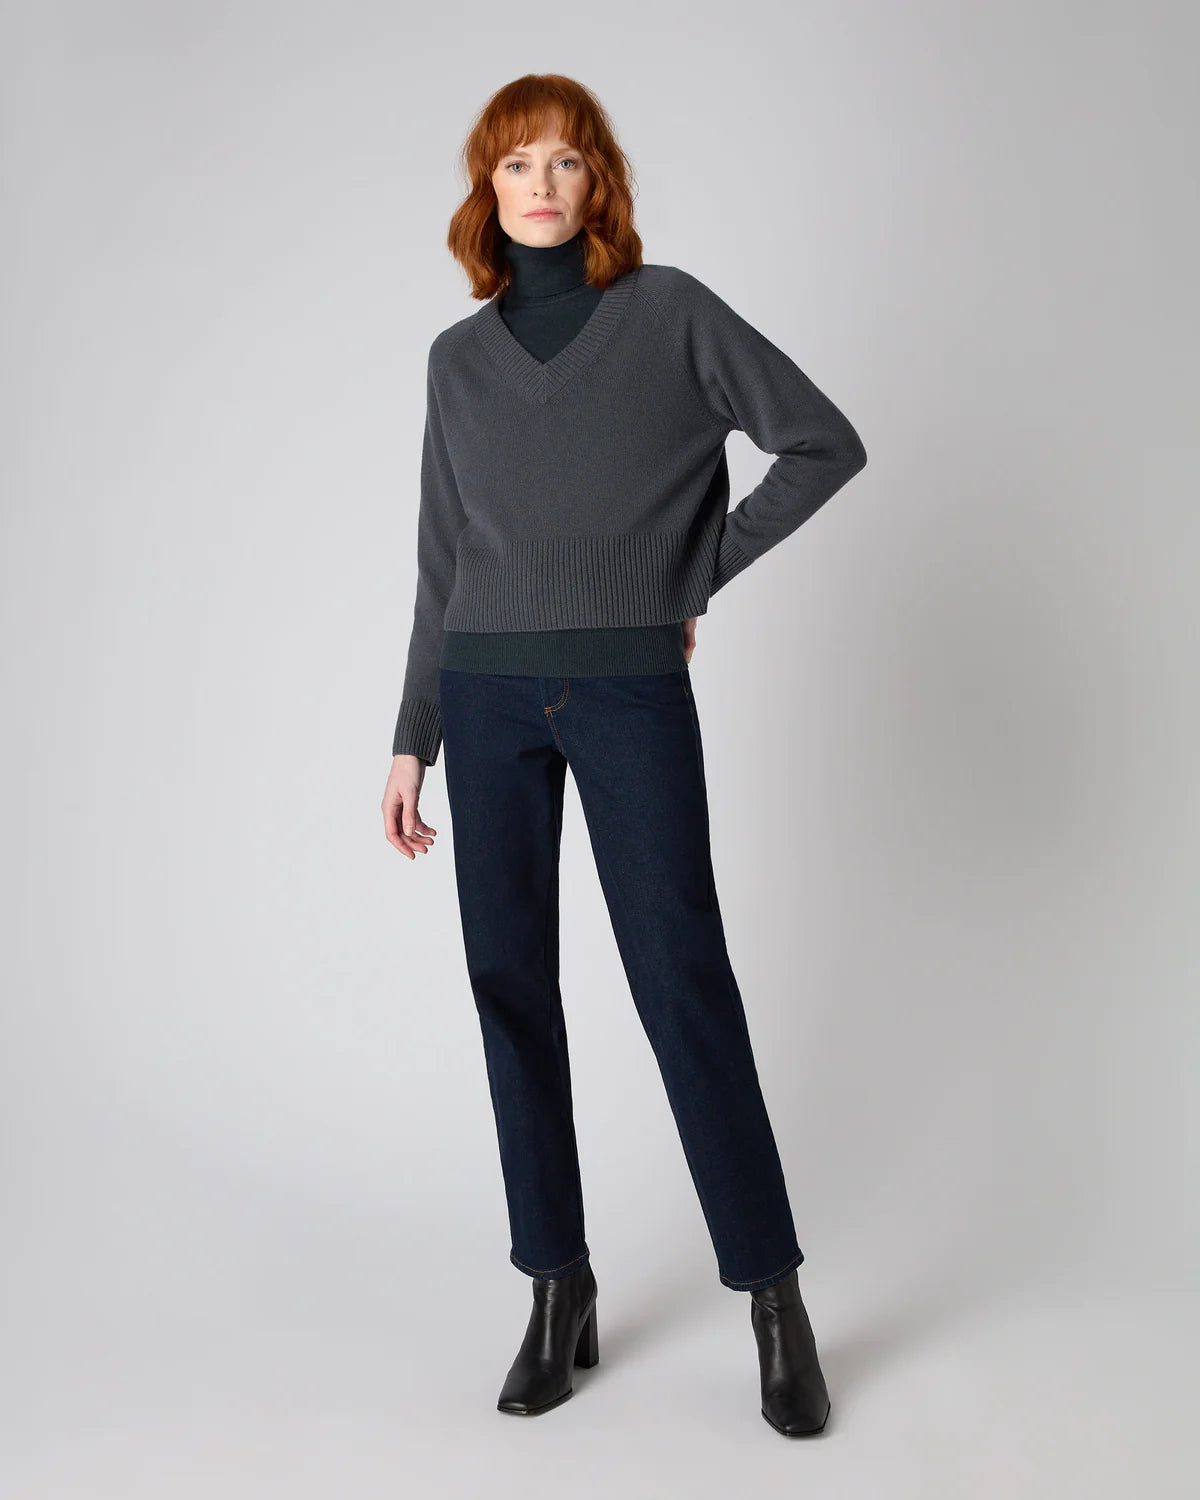 women wearing dark grey v-neck jumper with turtle neck and pants